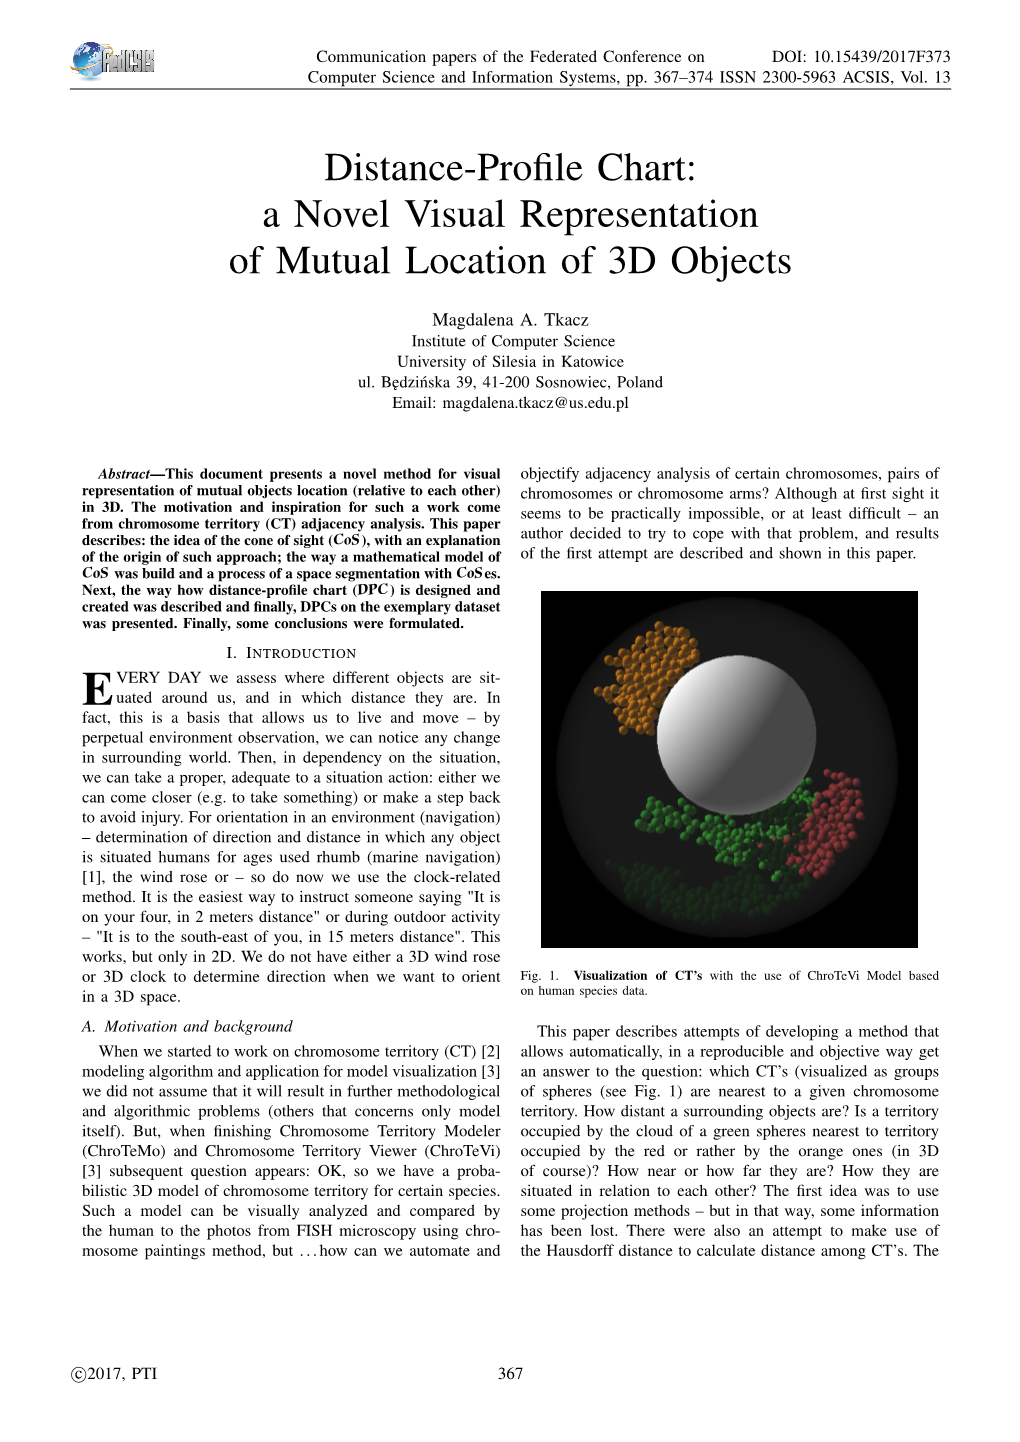 A Novel Visual Representation of Mutual Location of 3D Objects